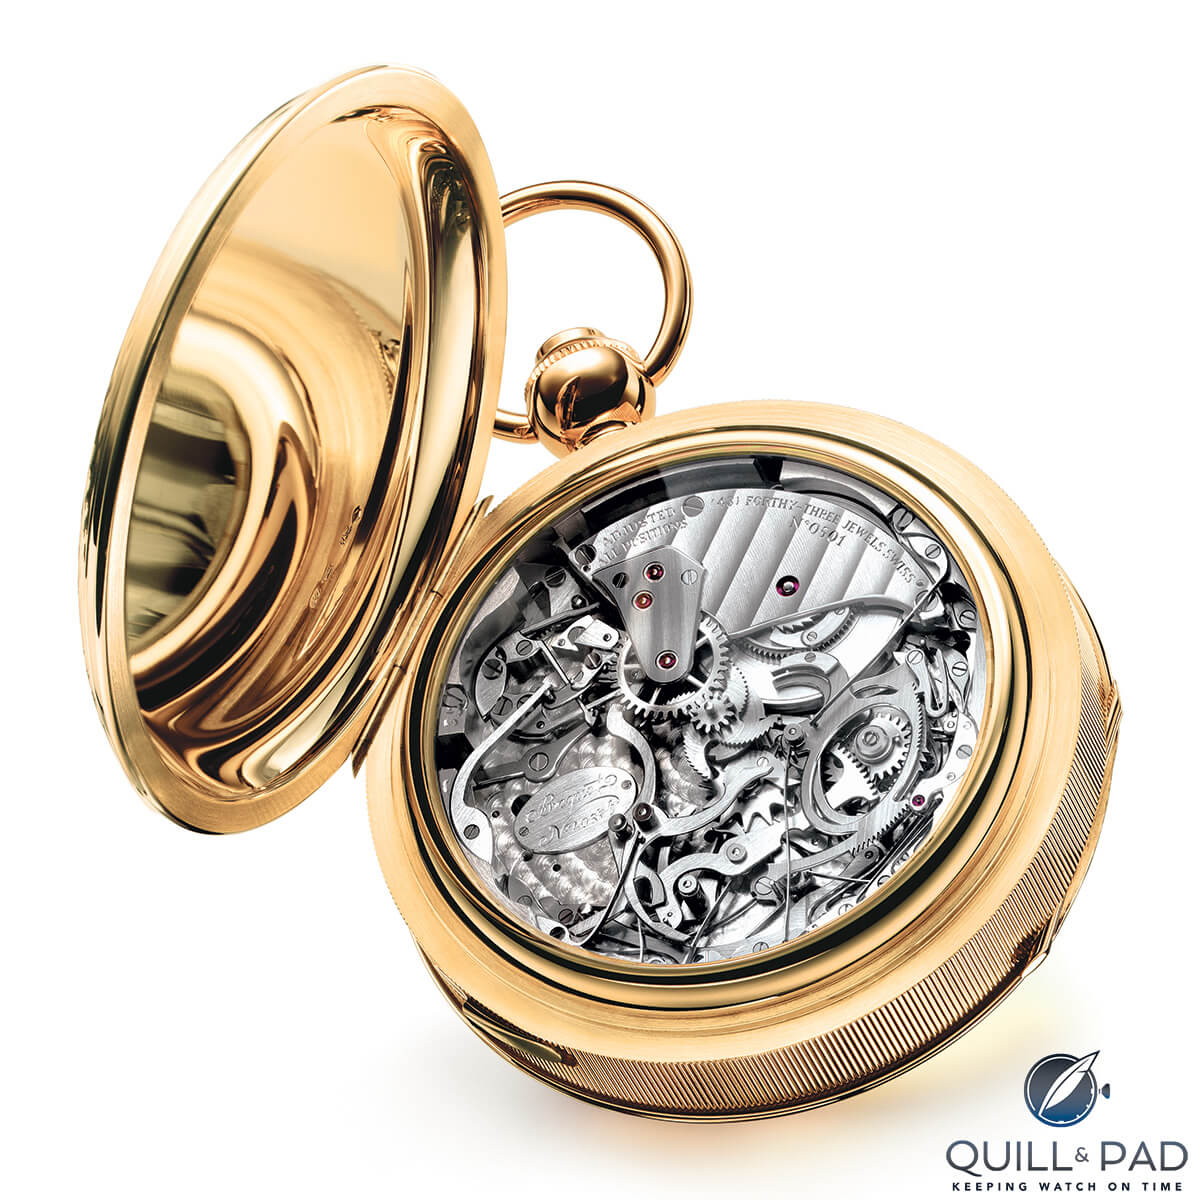 Lifted cover for a view through the display back of the Breguet Reference 1907 pocket watch